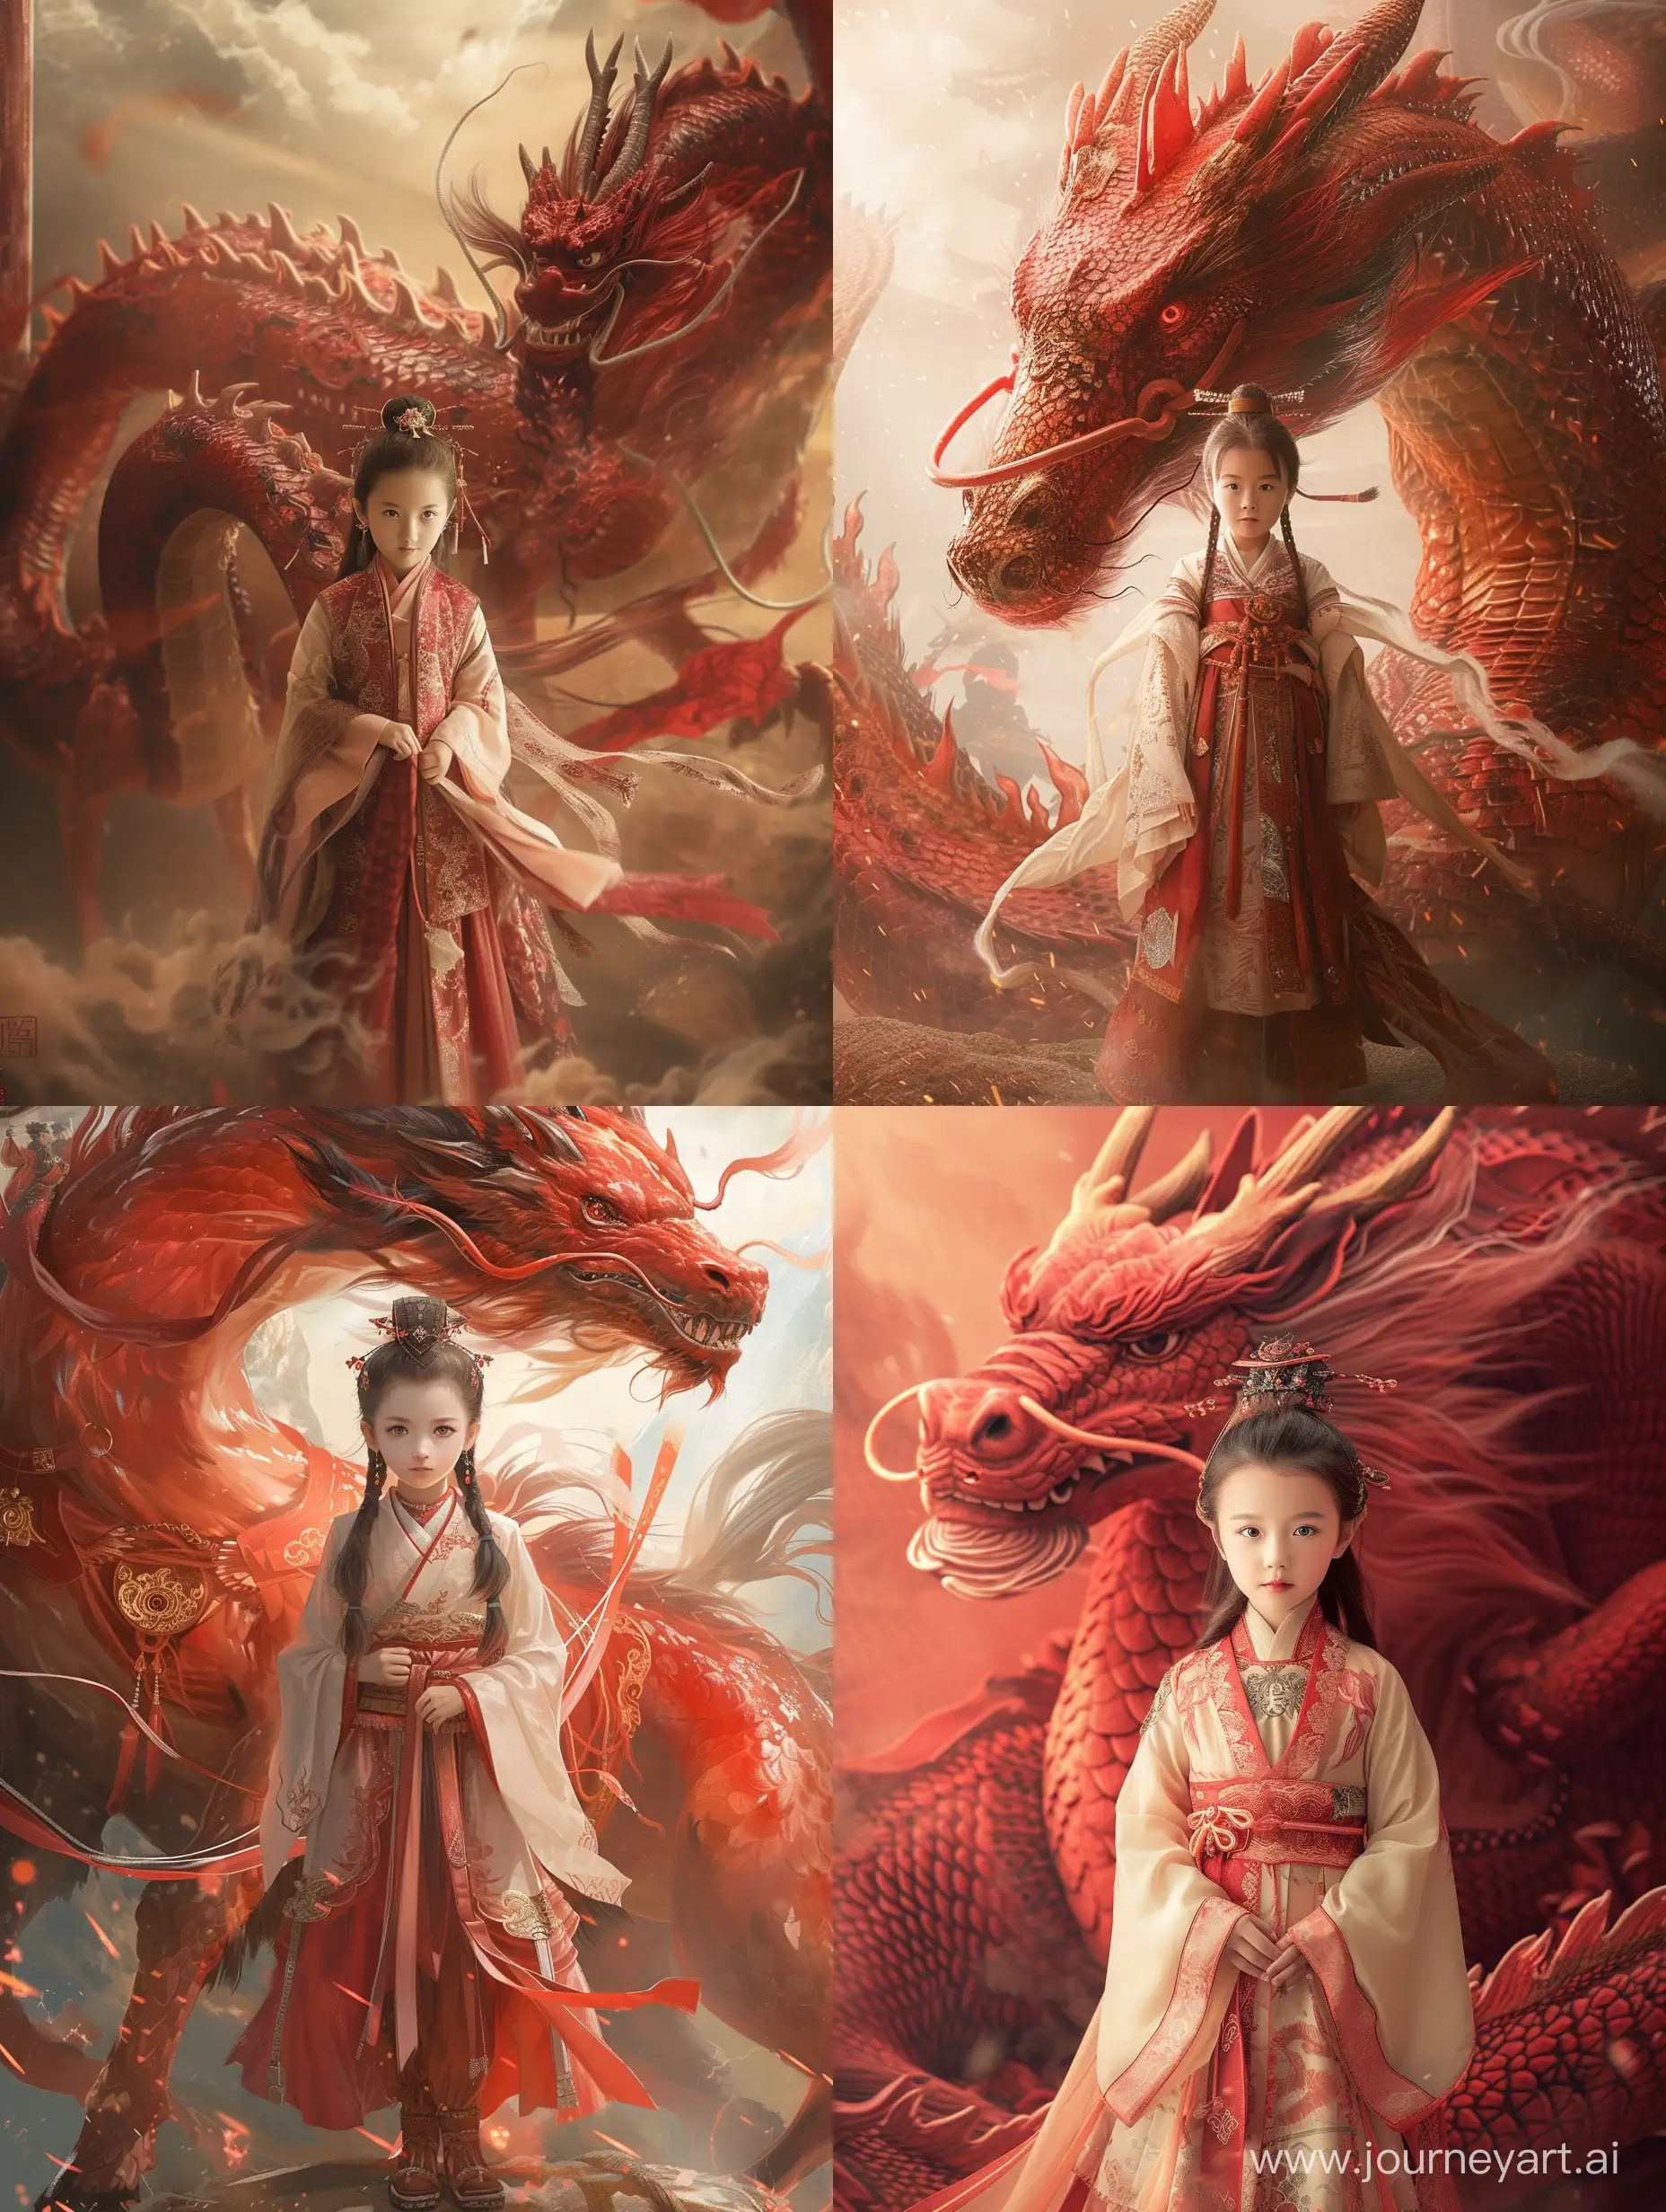 An 8-year-old girl, dressed in traditional Chinese clothing, stands in front of a dreamy red dragon - the dragon, with its primary color being red. She rode on a warhorse with a handsome posture. This image includes frontal, half body, and full body shots. The inspiration for the visual style comes from the Three Kingdoms, Northern and Southern Dynasties